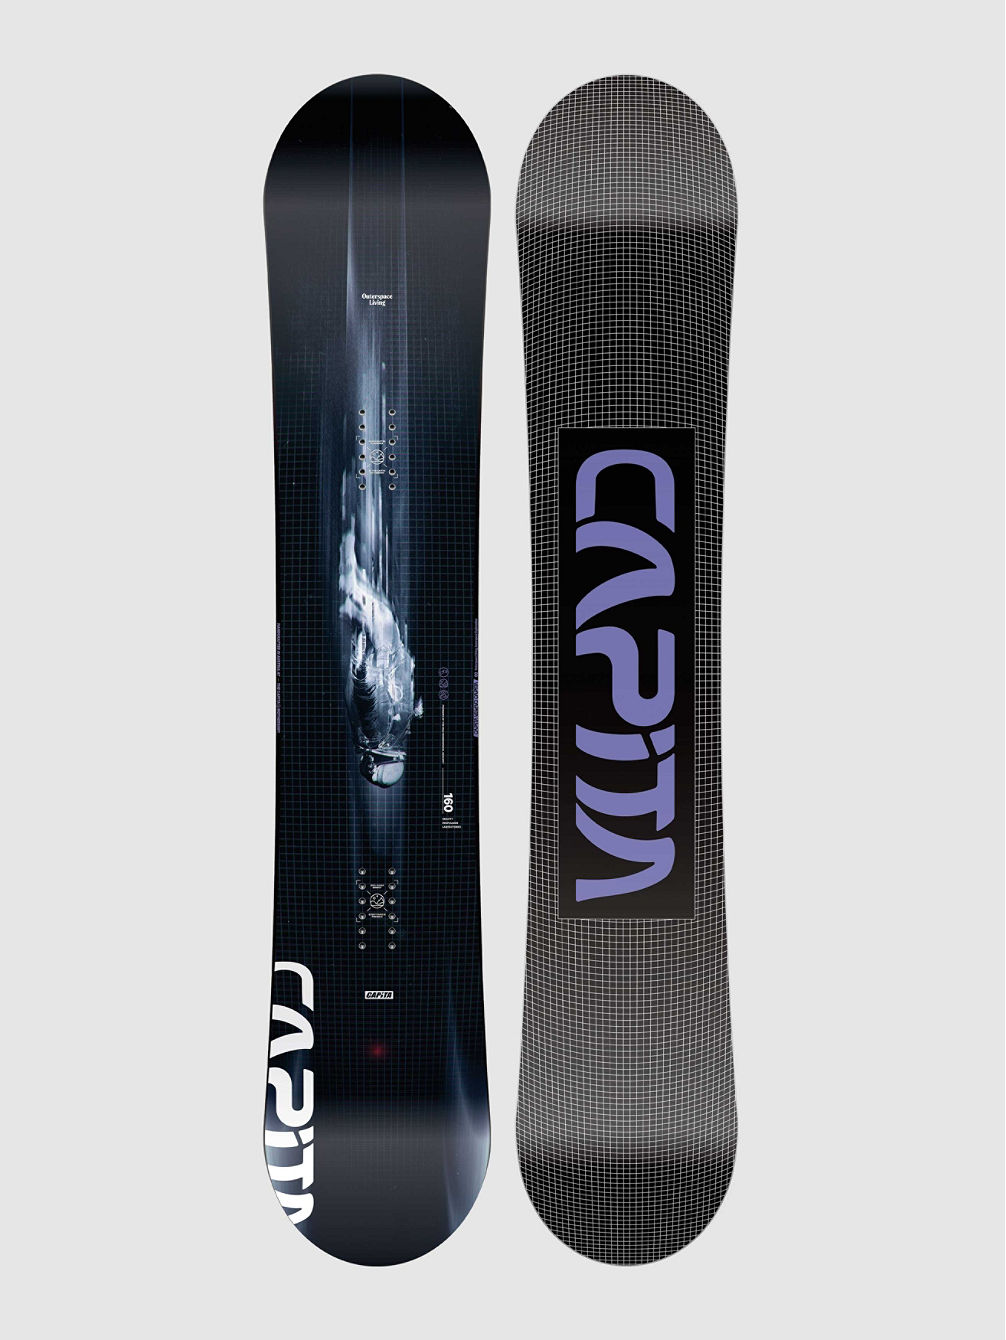 Outerspace Living 2024 Snowboard